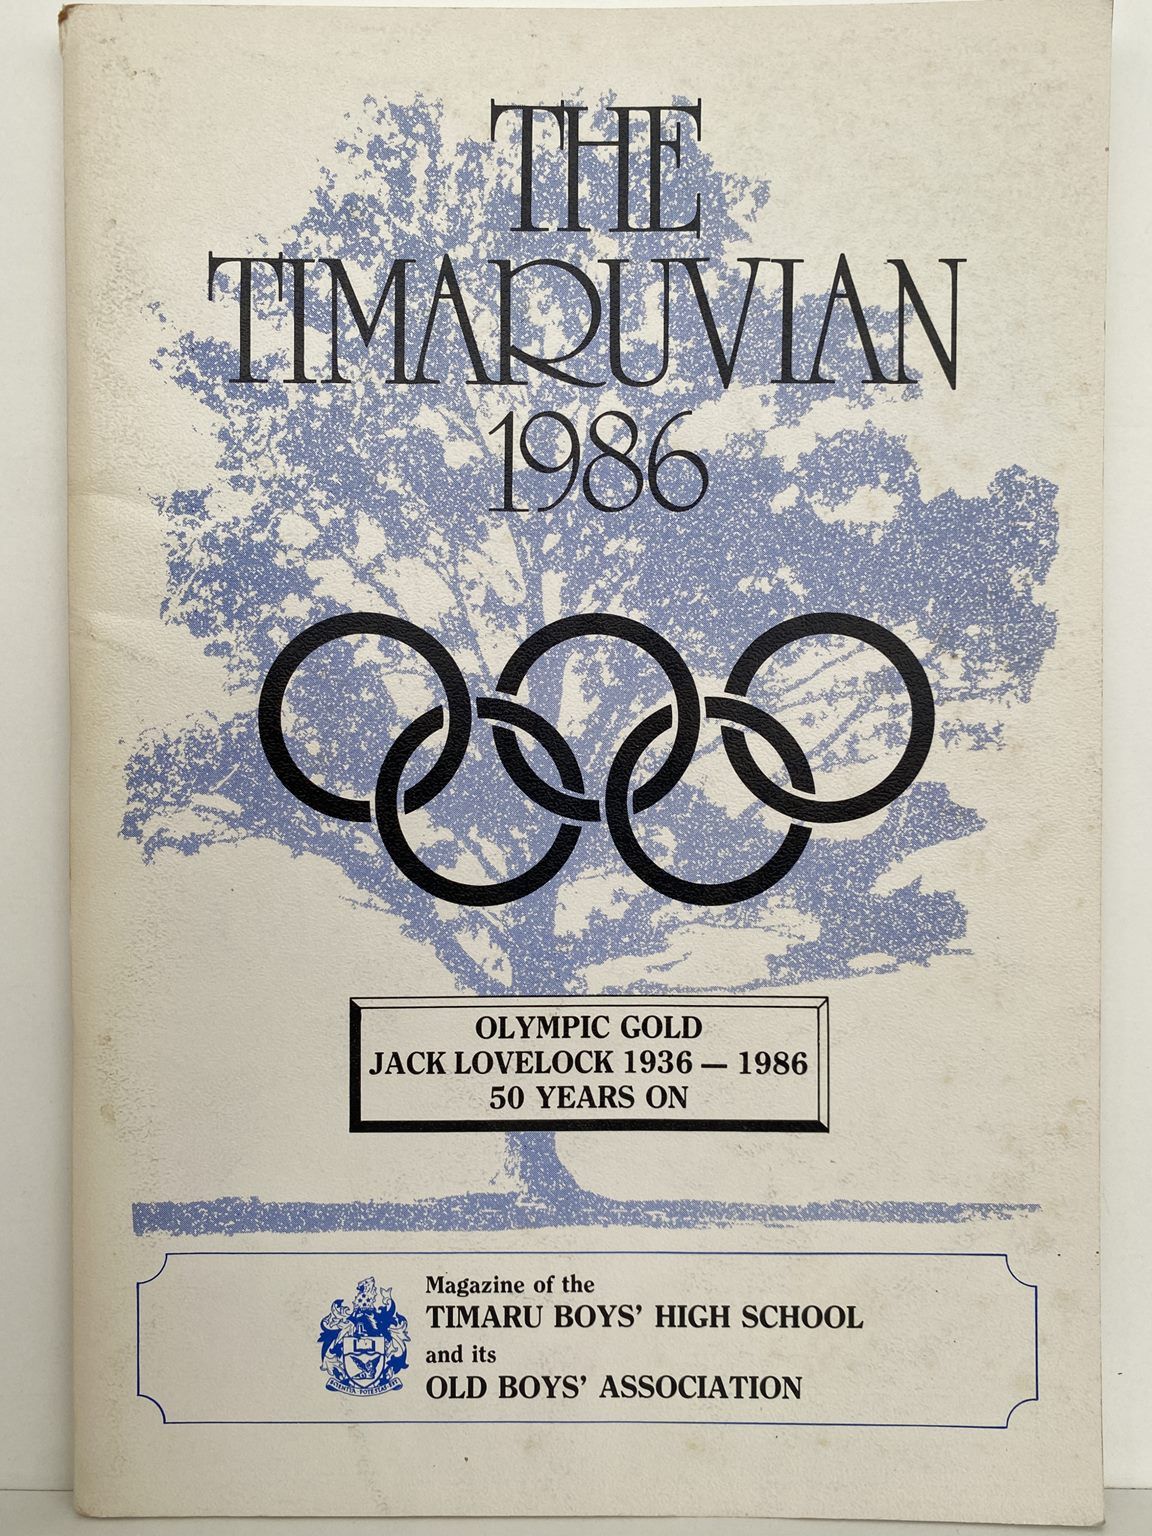 THE TIMARUVIAN: Magazine of the Timaru Boys' High School and its Old Boys' Association 1986